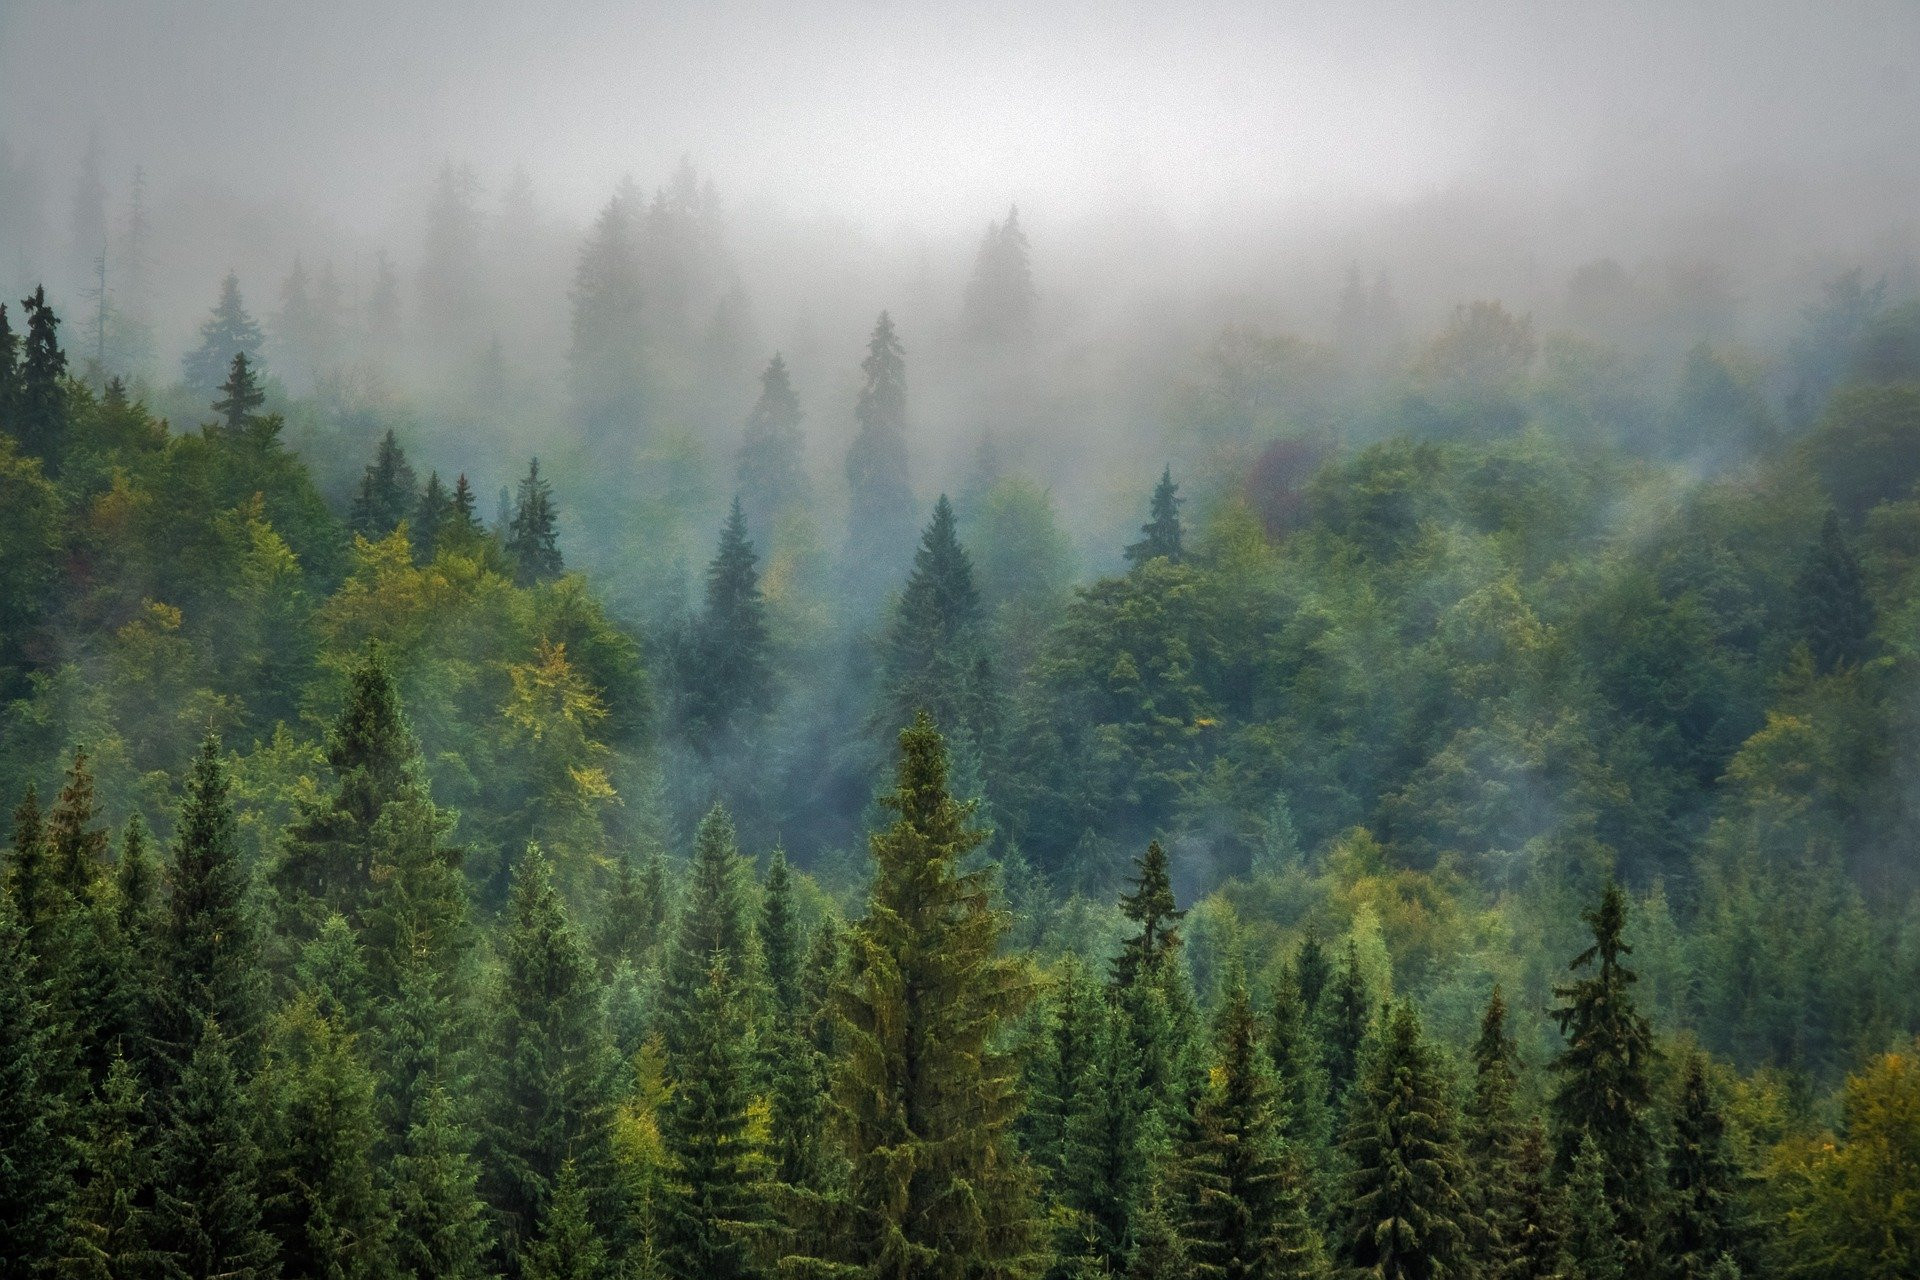 A boreal forest over which low fog is hanging